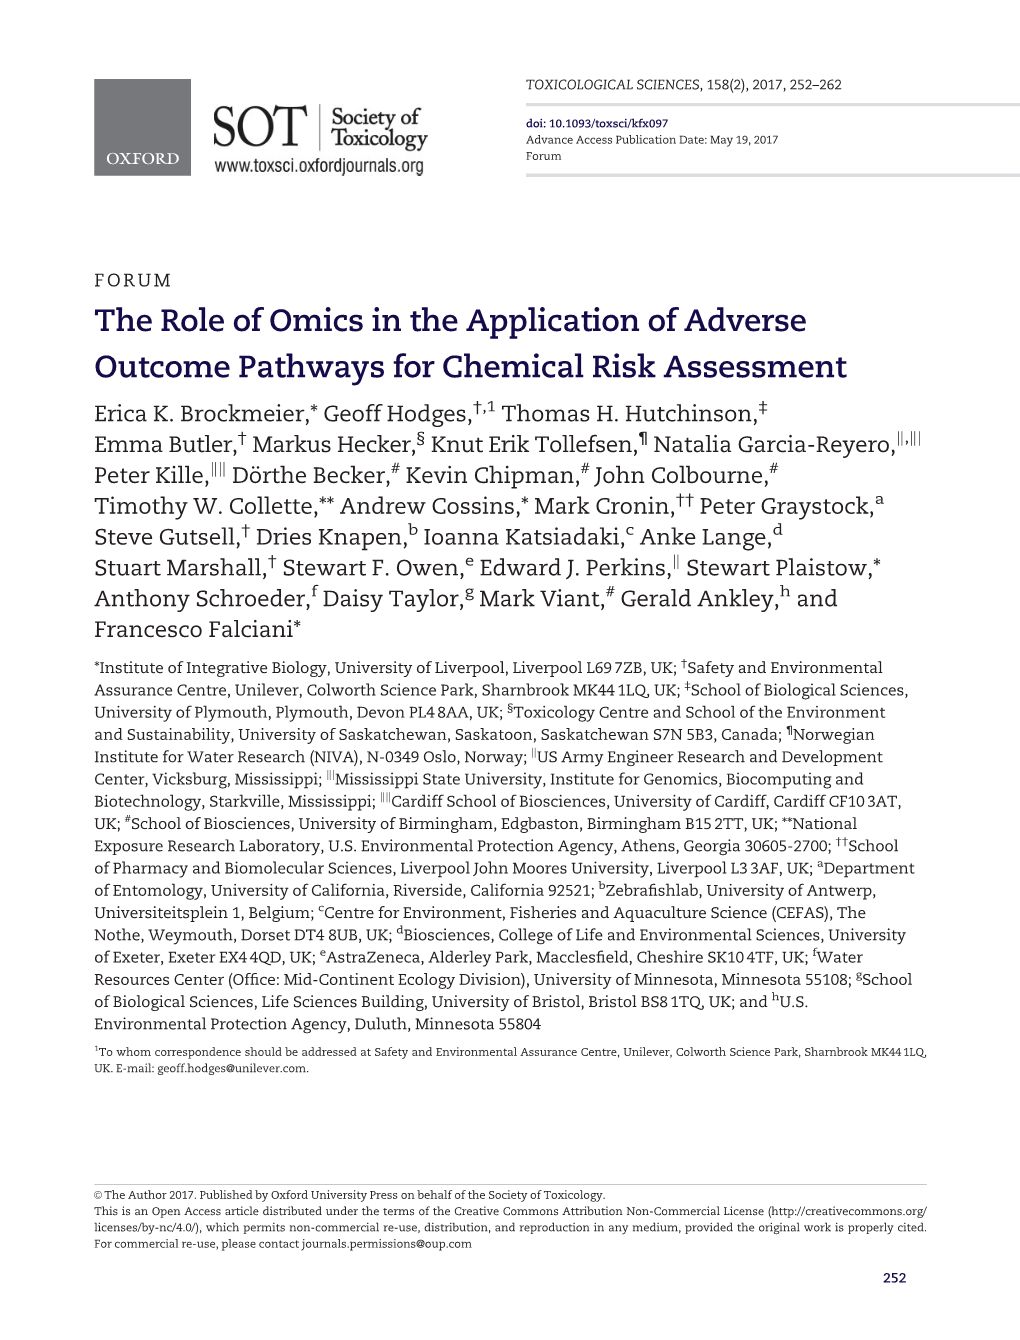 The Role of Omics in the Application of Adverse Outcome Pathways for Chemical Risk Assessment Erica K